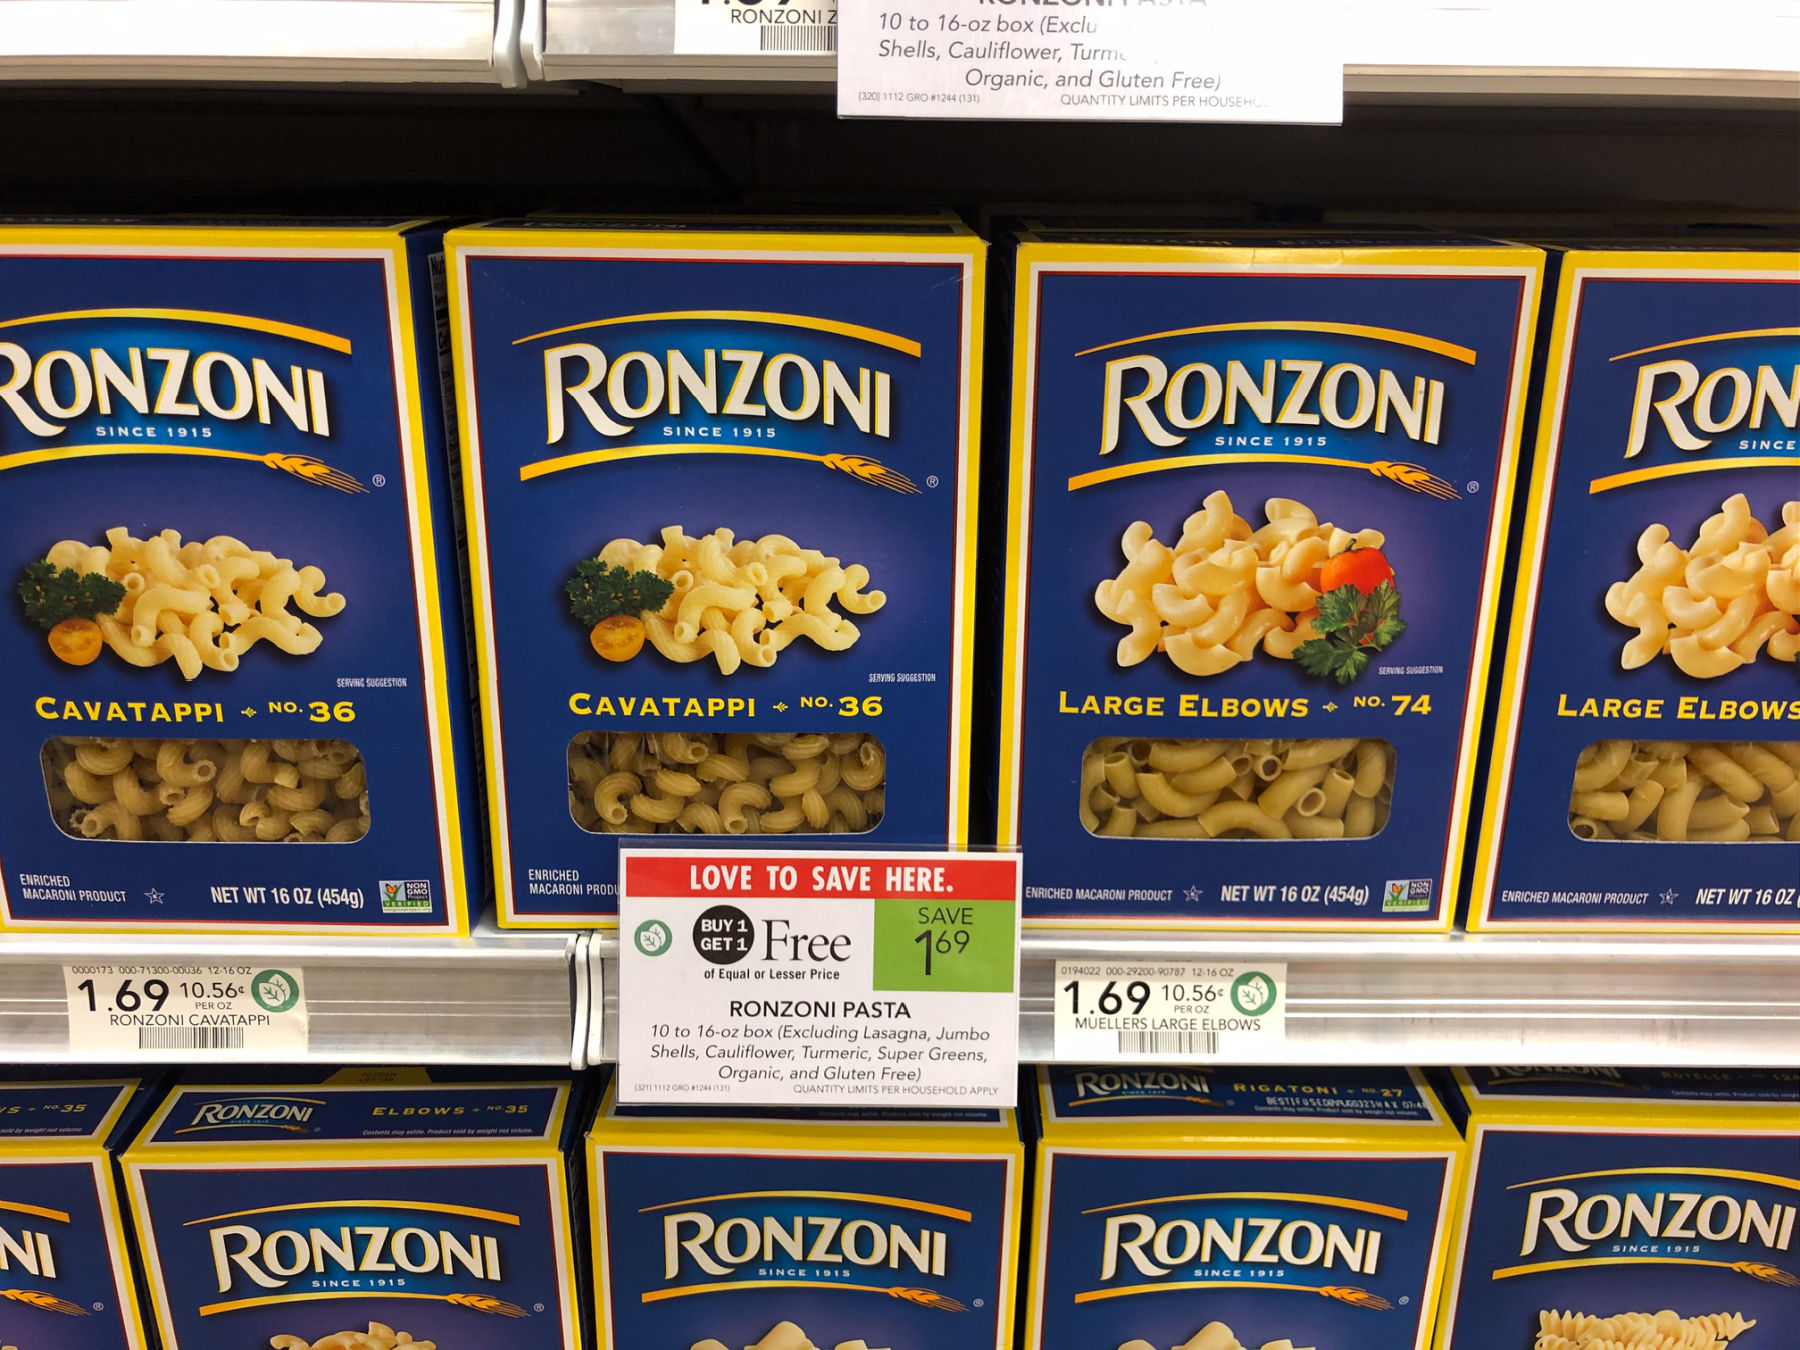 Ronzoni Pasta Is BOGO At Publix - Great Time To Make This Lemon and Rosemary Mac and Cheese on I Heart Publix 2